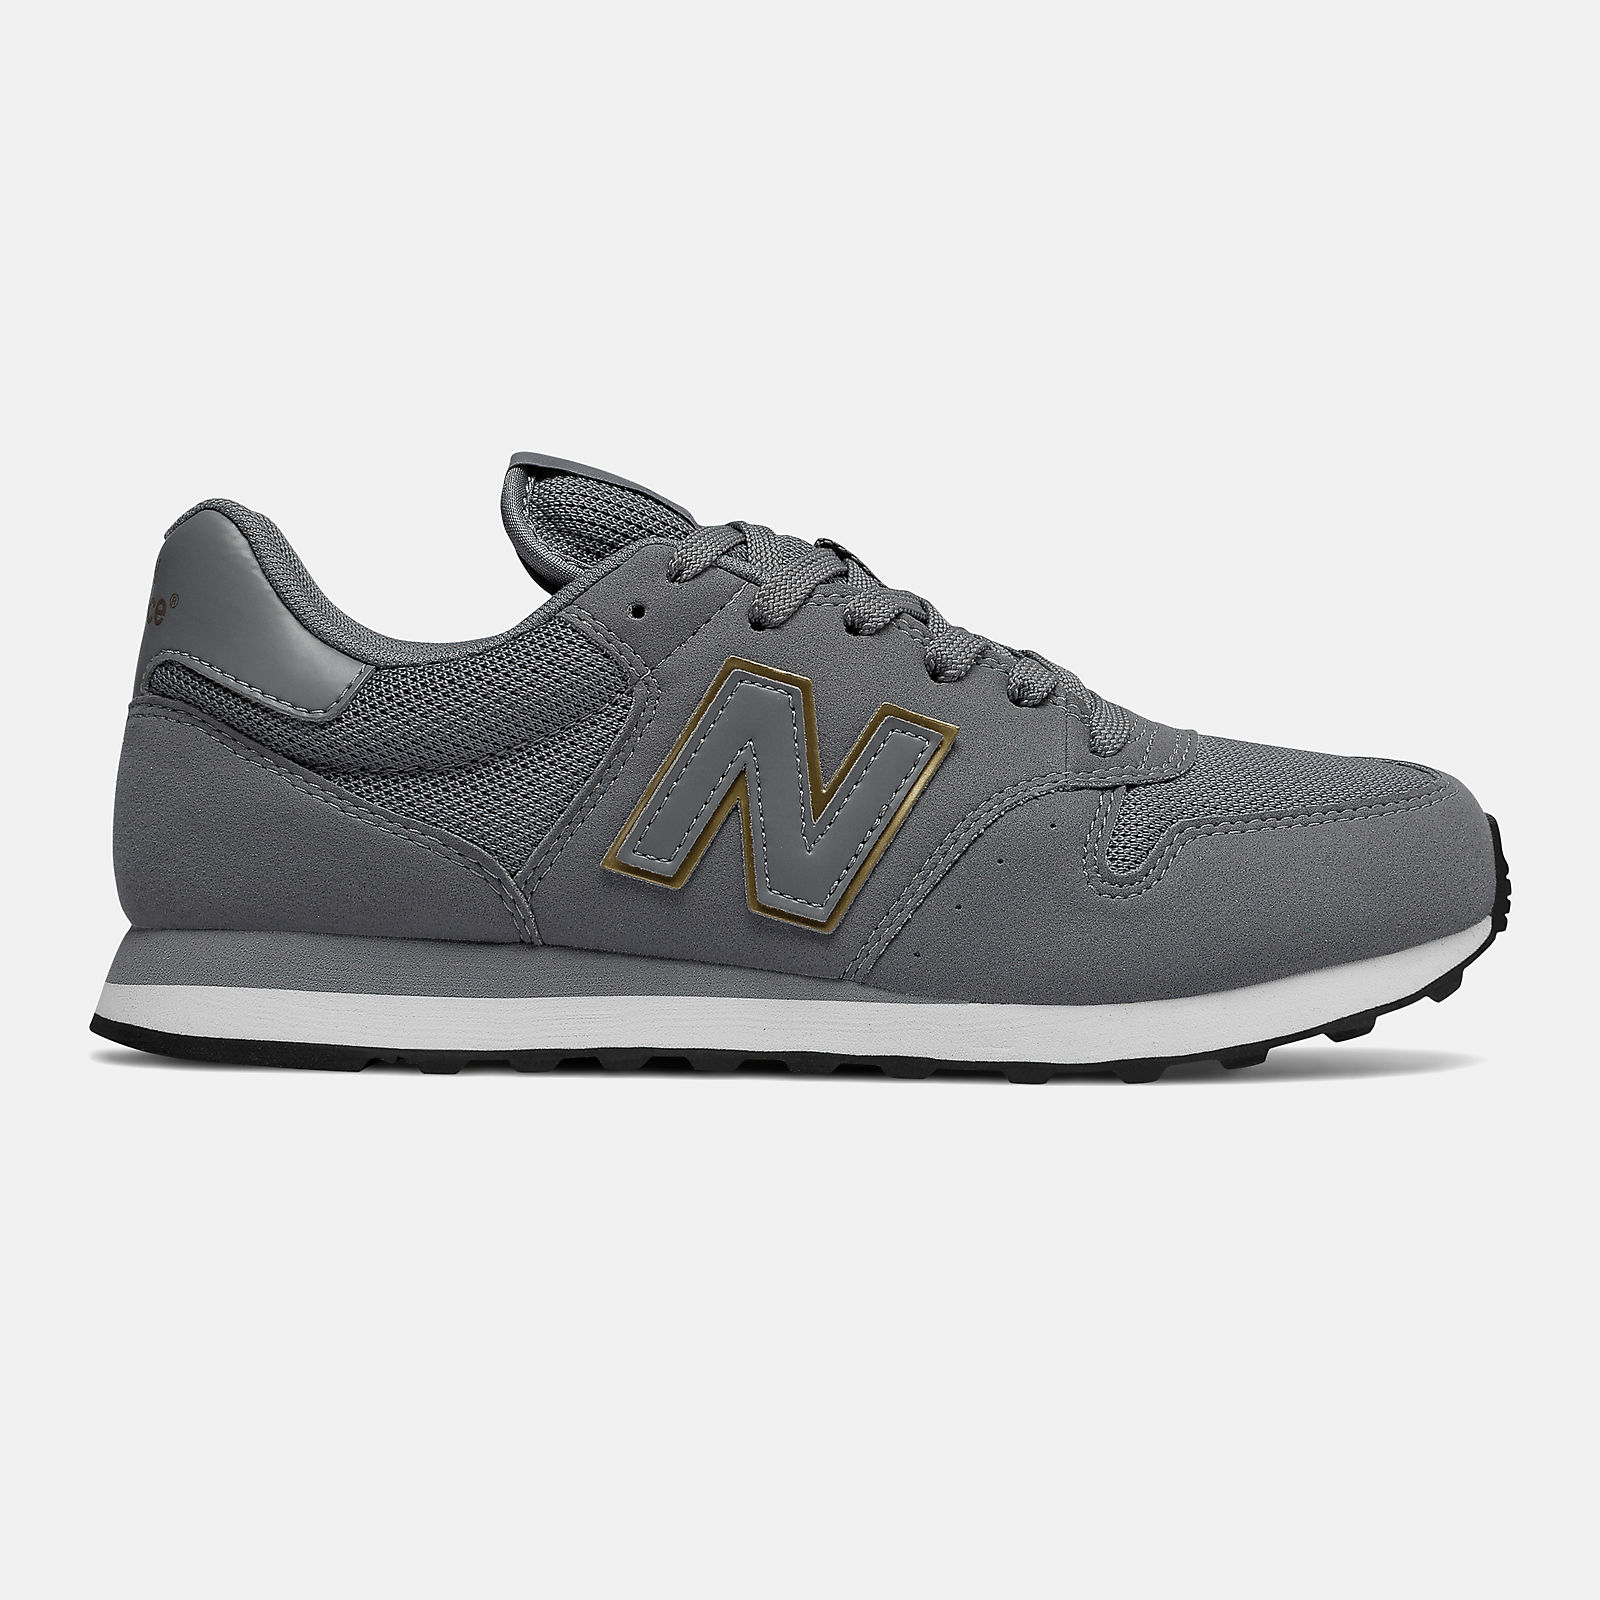 500 Classic Shoes - New Balance هواوي متنقل